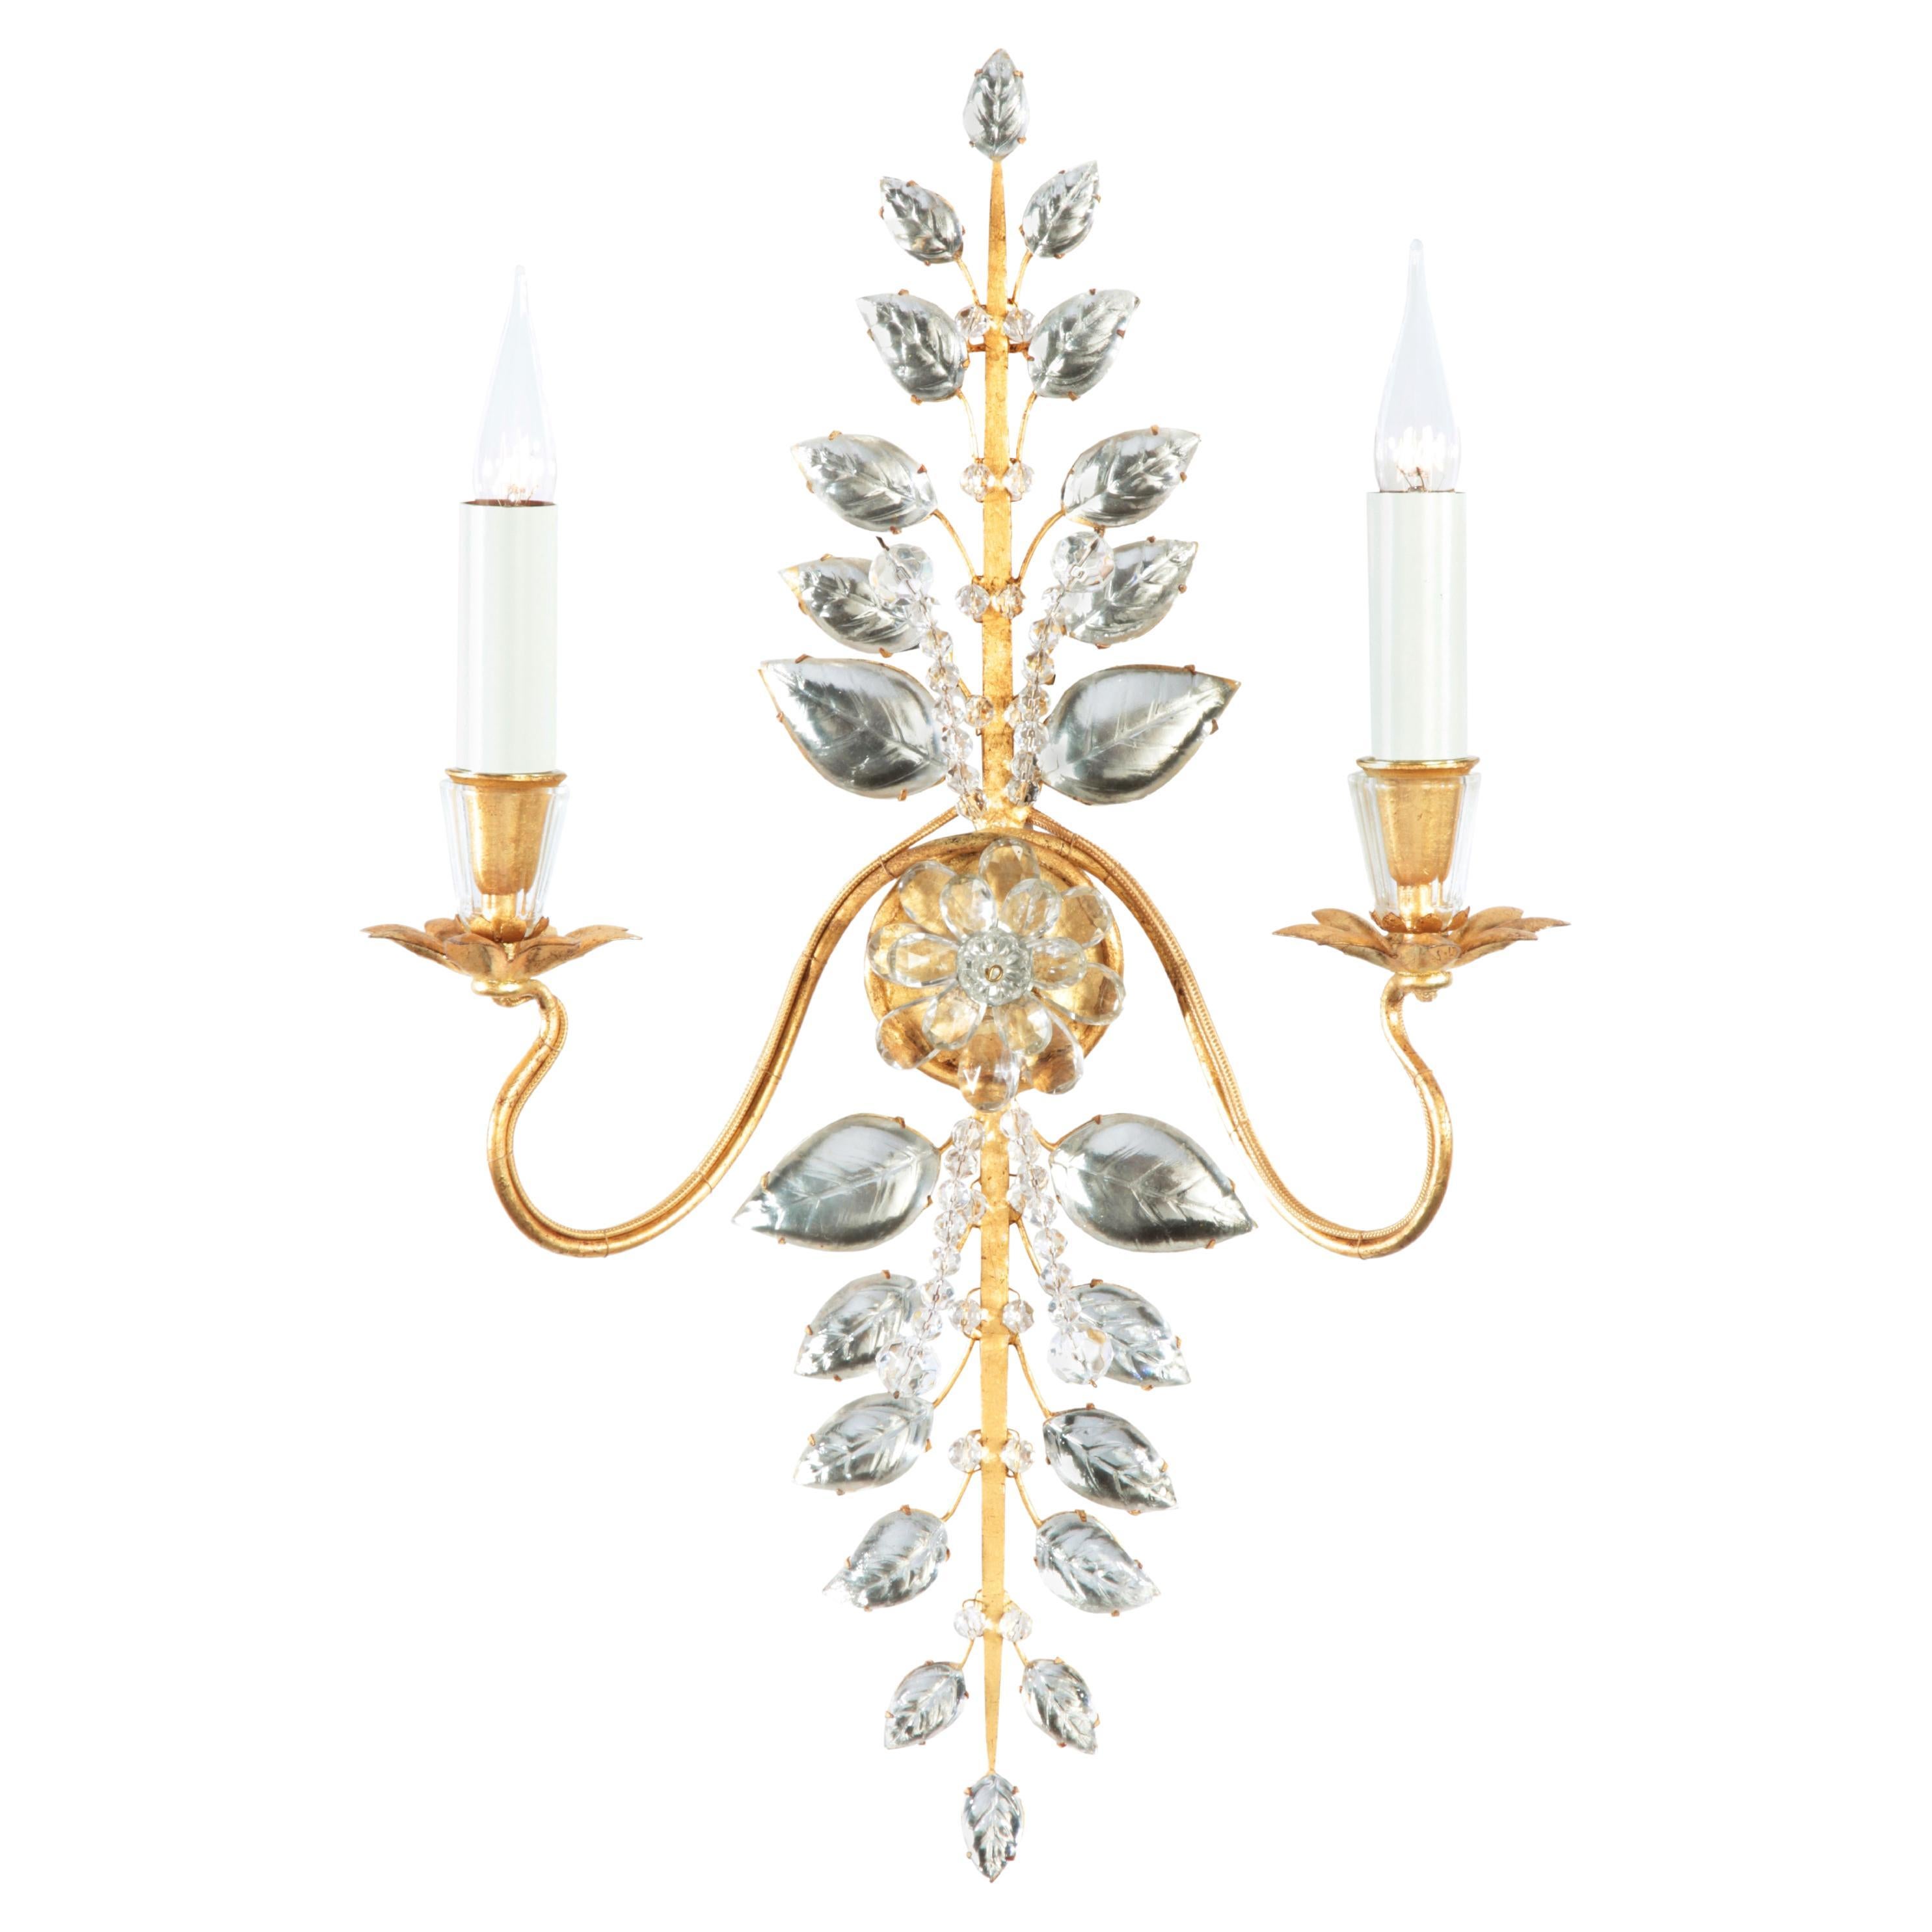 Certified Maison Bagues Sconce, Iron and Crystal 2 Lights #11169 For Sale